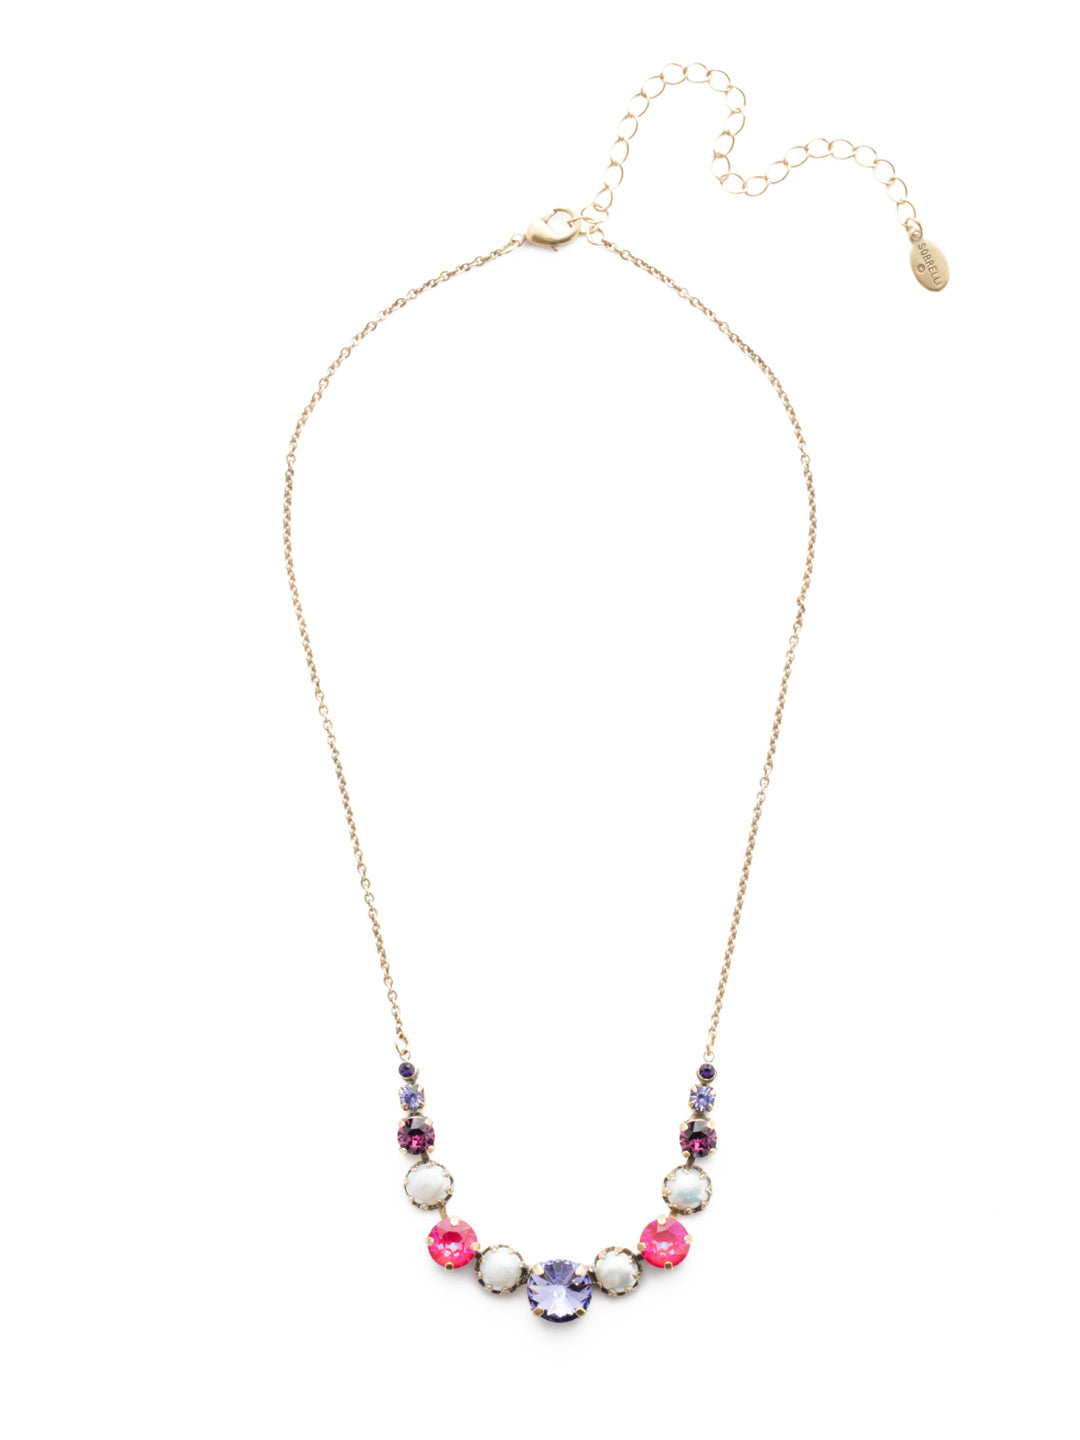 Dallas Tennis Necklace - NEU14AGDCS - <p>The Dallas Tennis Necklace is quintessential Sorrelli. Circular crystal sparklers pair with classic freshwater pearls, making this the perfect additon to your collection or to gift to someone just starting their Sorrelli journey. From Sorrelli's Duchess collection in our Antique Gold-tone finish.</p>